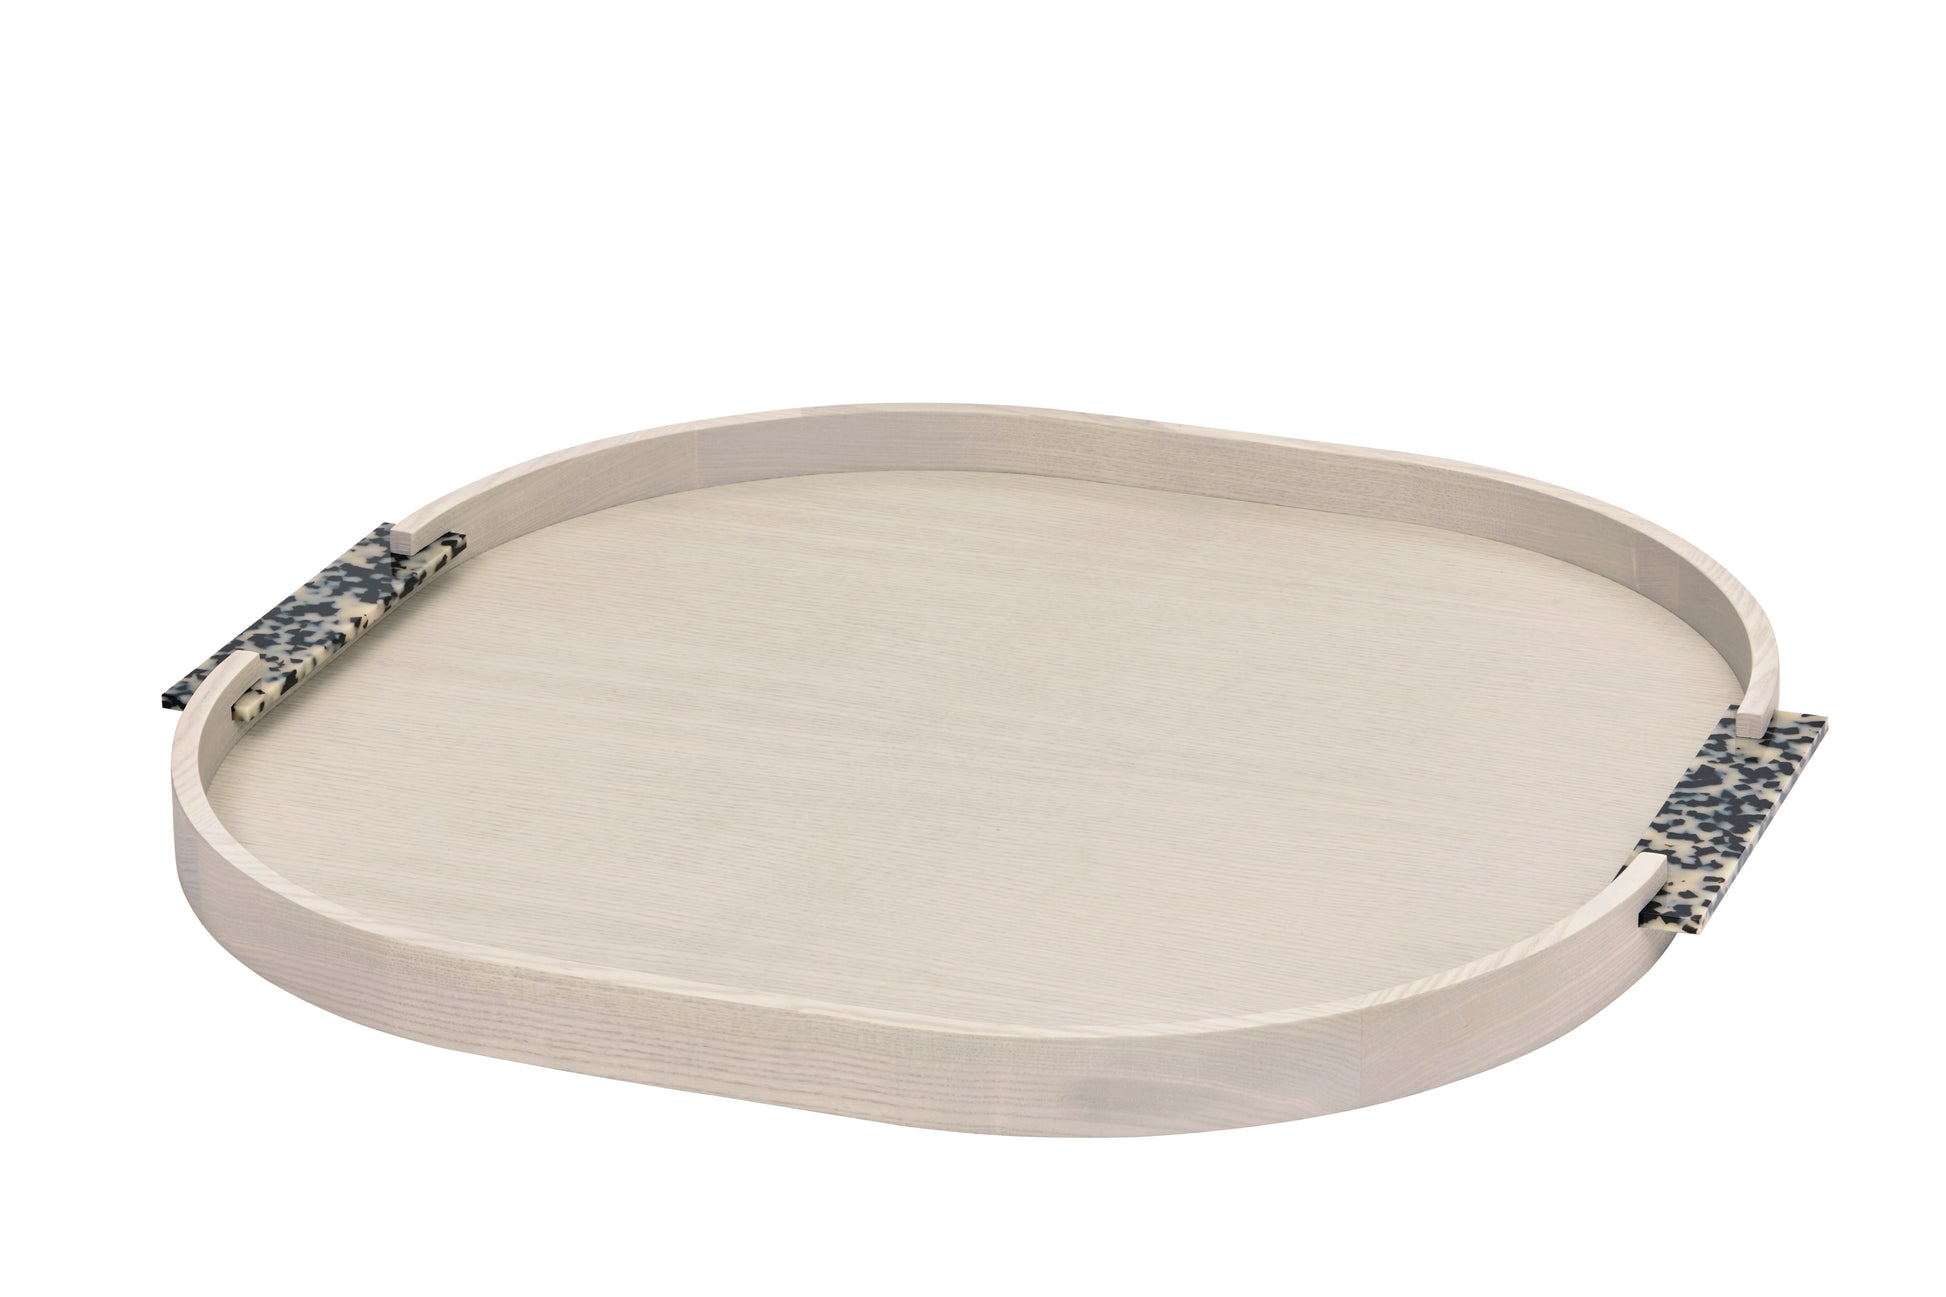 Riviere Dama Tortoise Rounded Tray | Luxury Home Accessories, Elegant Serving Trays & Gift Items | 2Jour Concierge, #1 luxury high-end gift & lifestyle shop